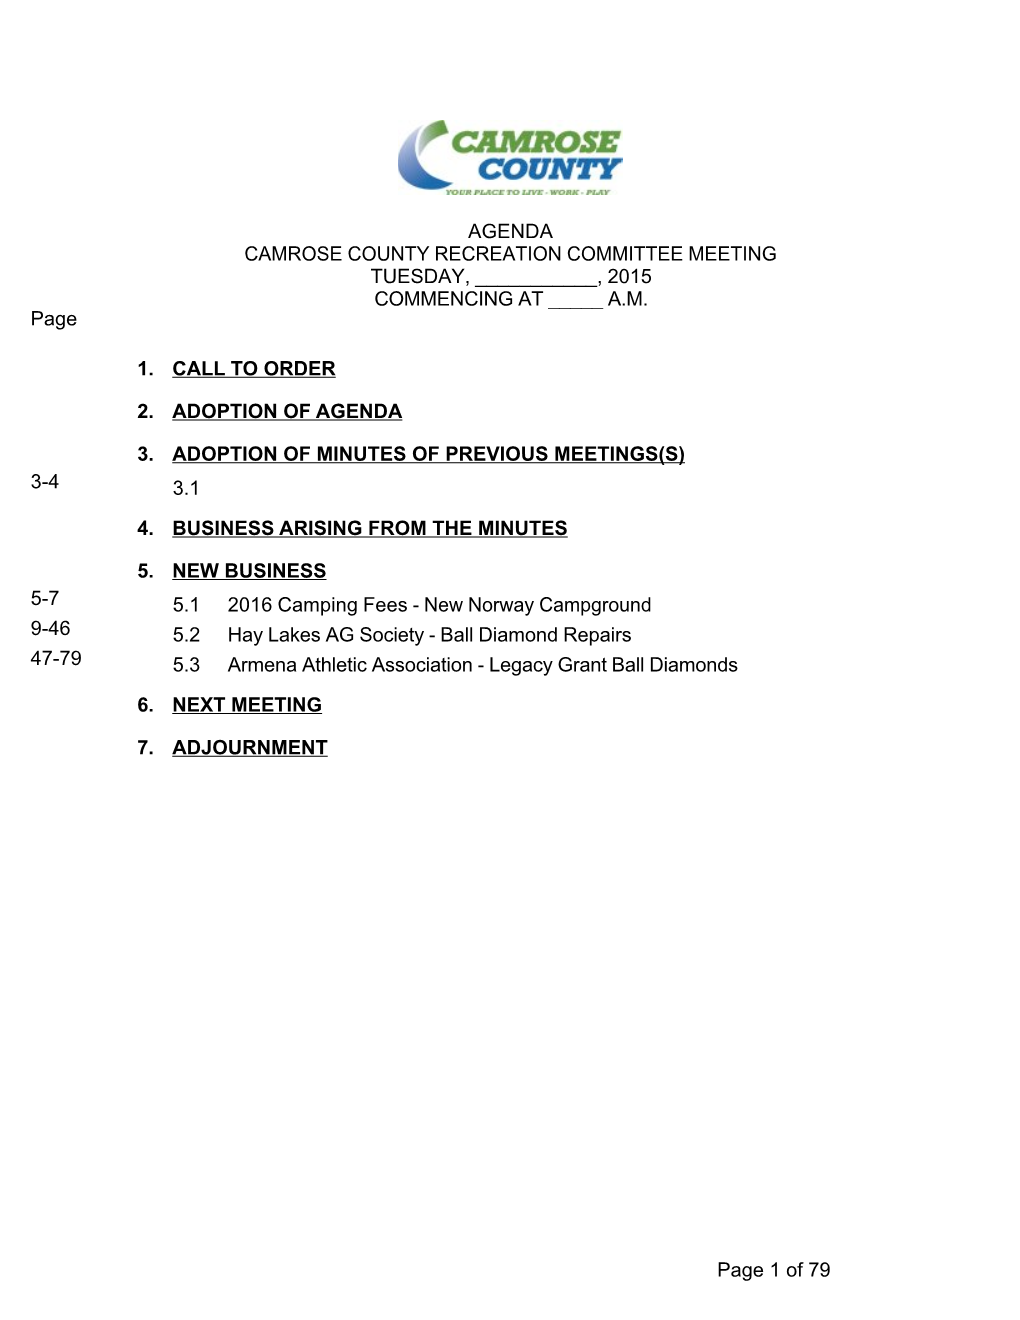 Agenda Camrose County Recreation Committee Meeting Tuesday, ______, 2015 Commencing at _____ A.M